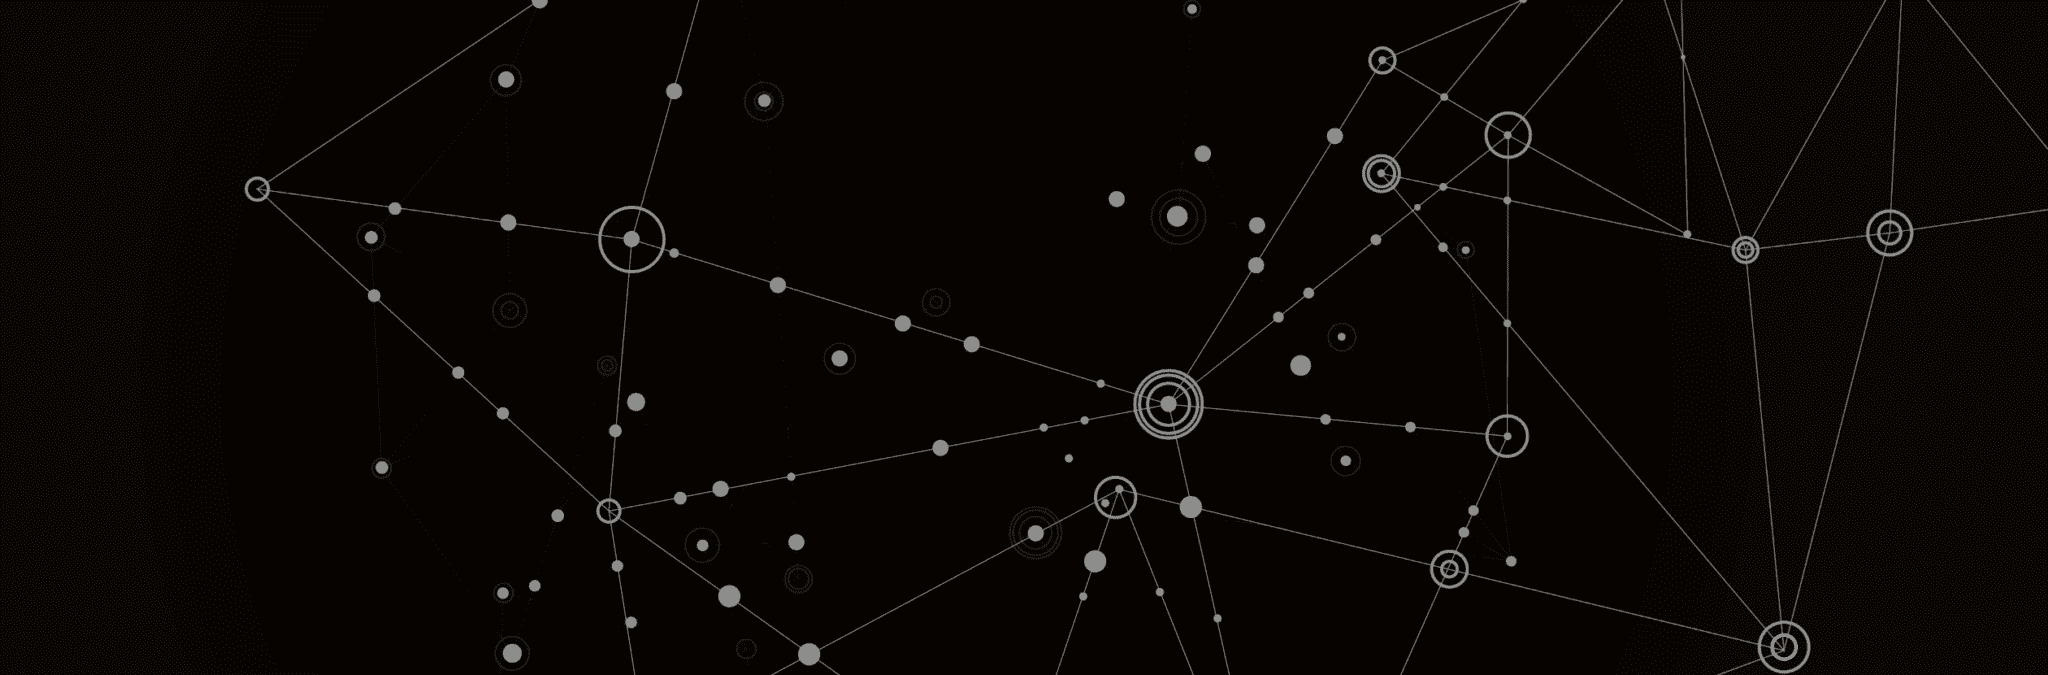 A black background with dots and connecting lines on top